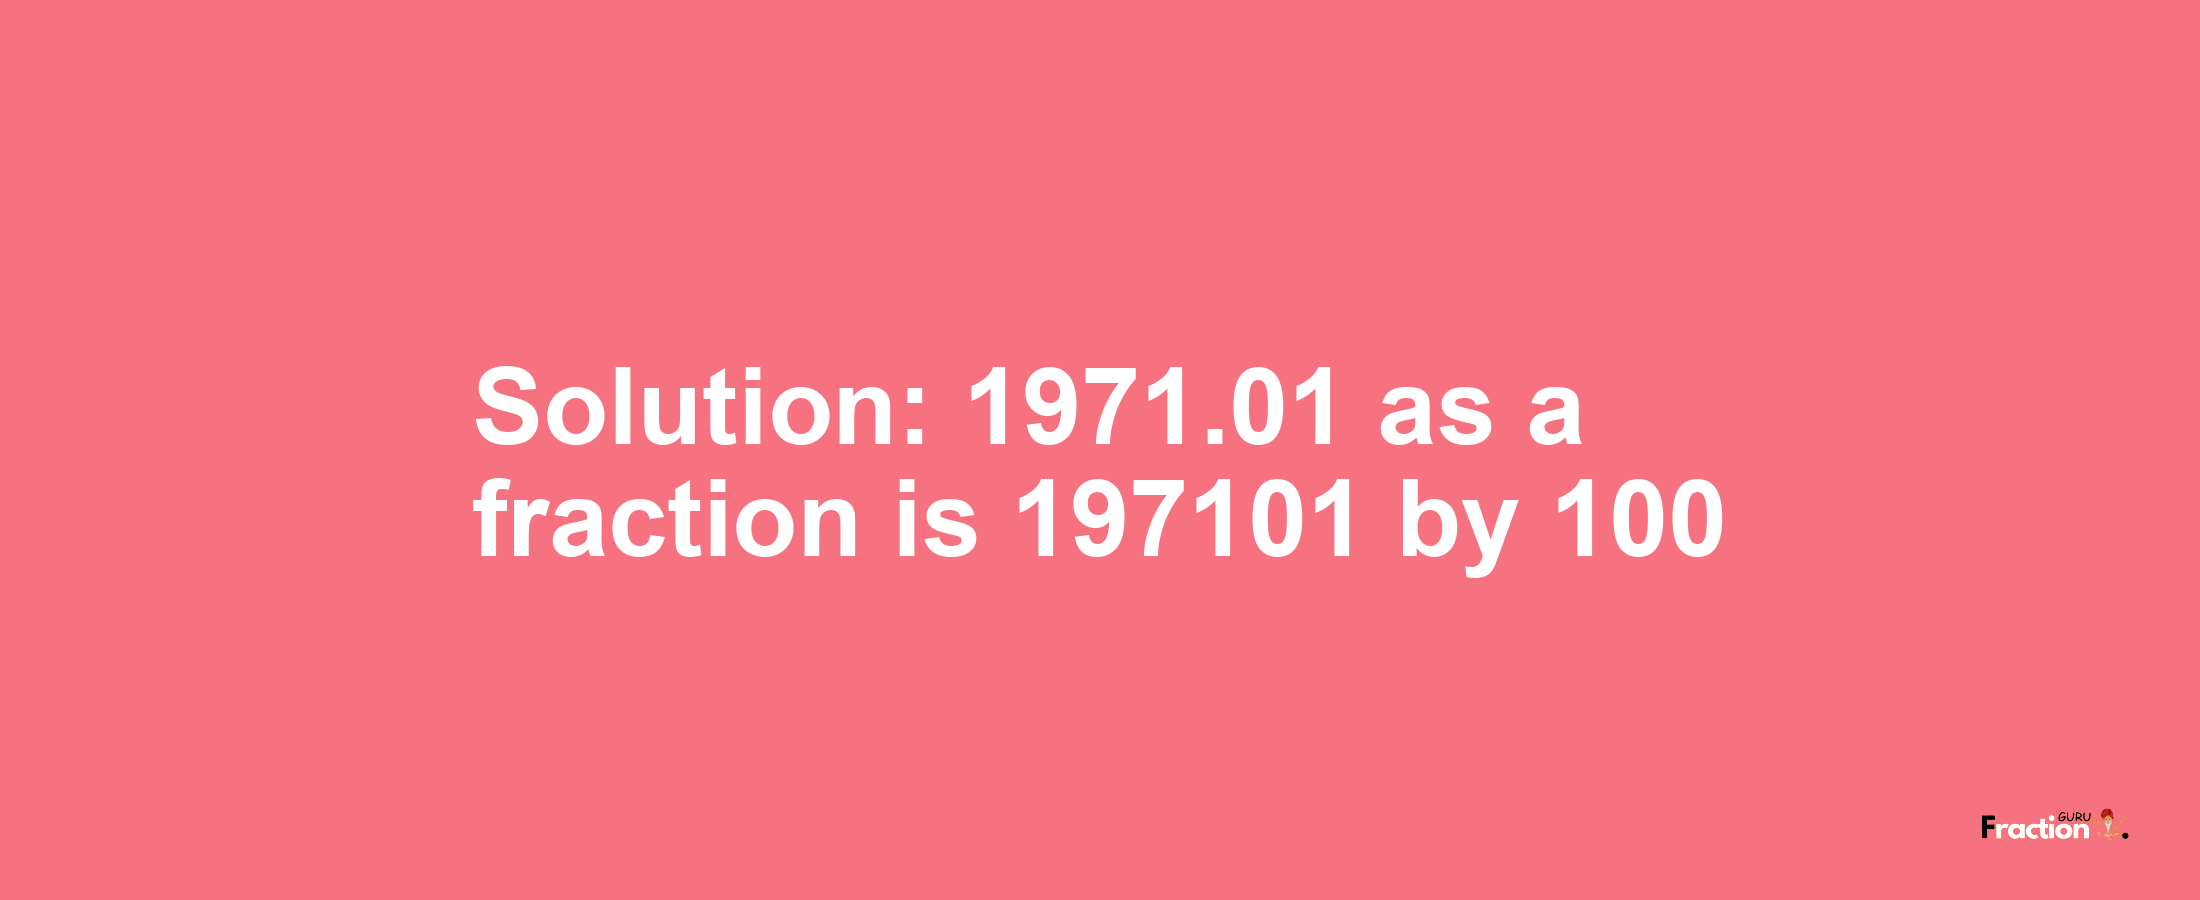 Solution:1971.01 as a fraction is 197101/100